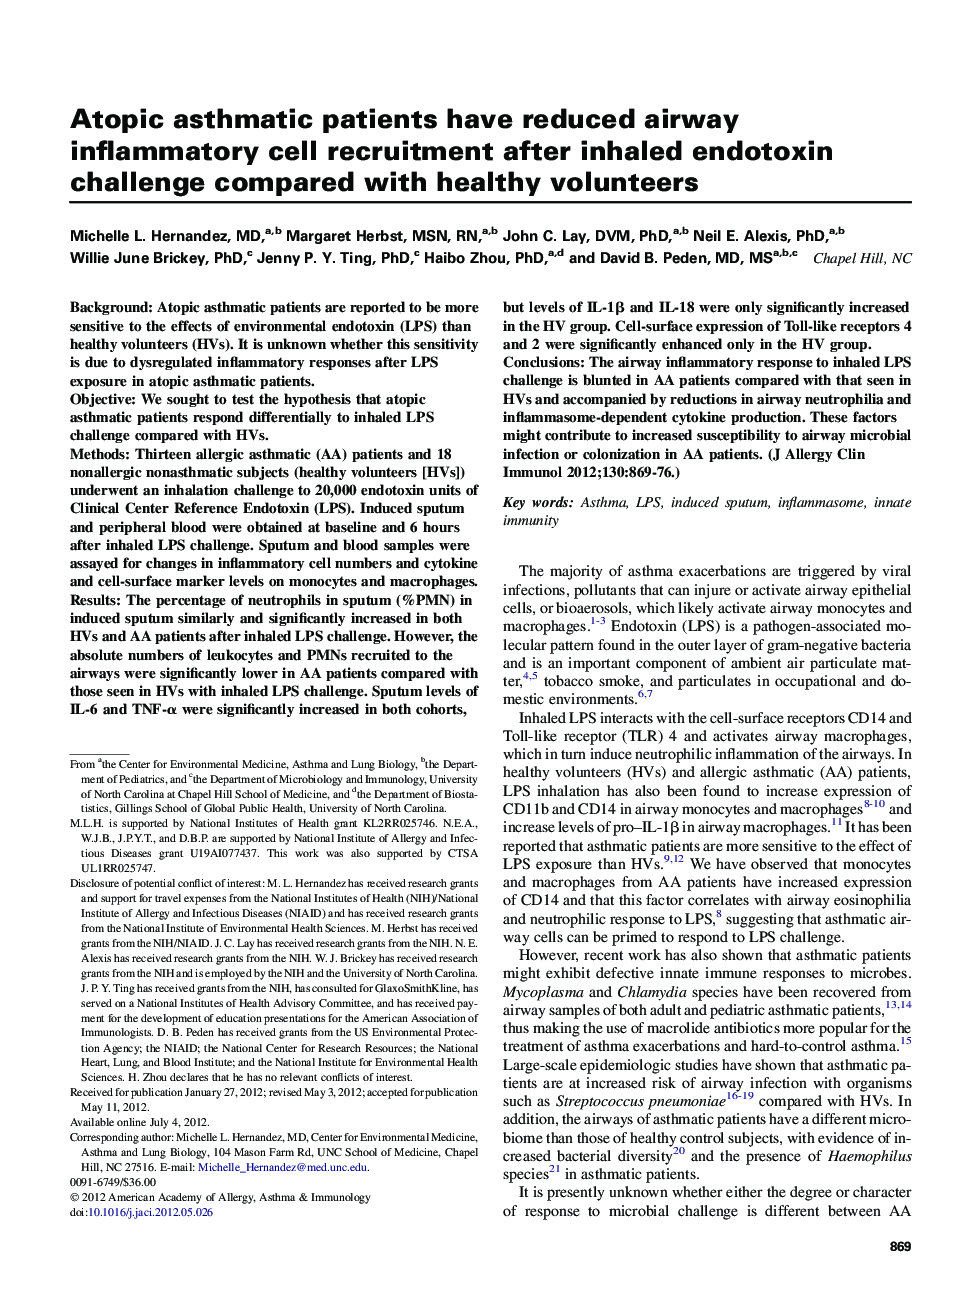 Atopic asthmatic patients have reduced airway inflammatory cell recruitment after inhaled endotoxin challenge compared with healthy volunteers